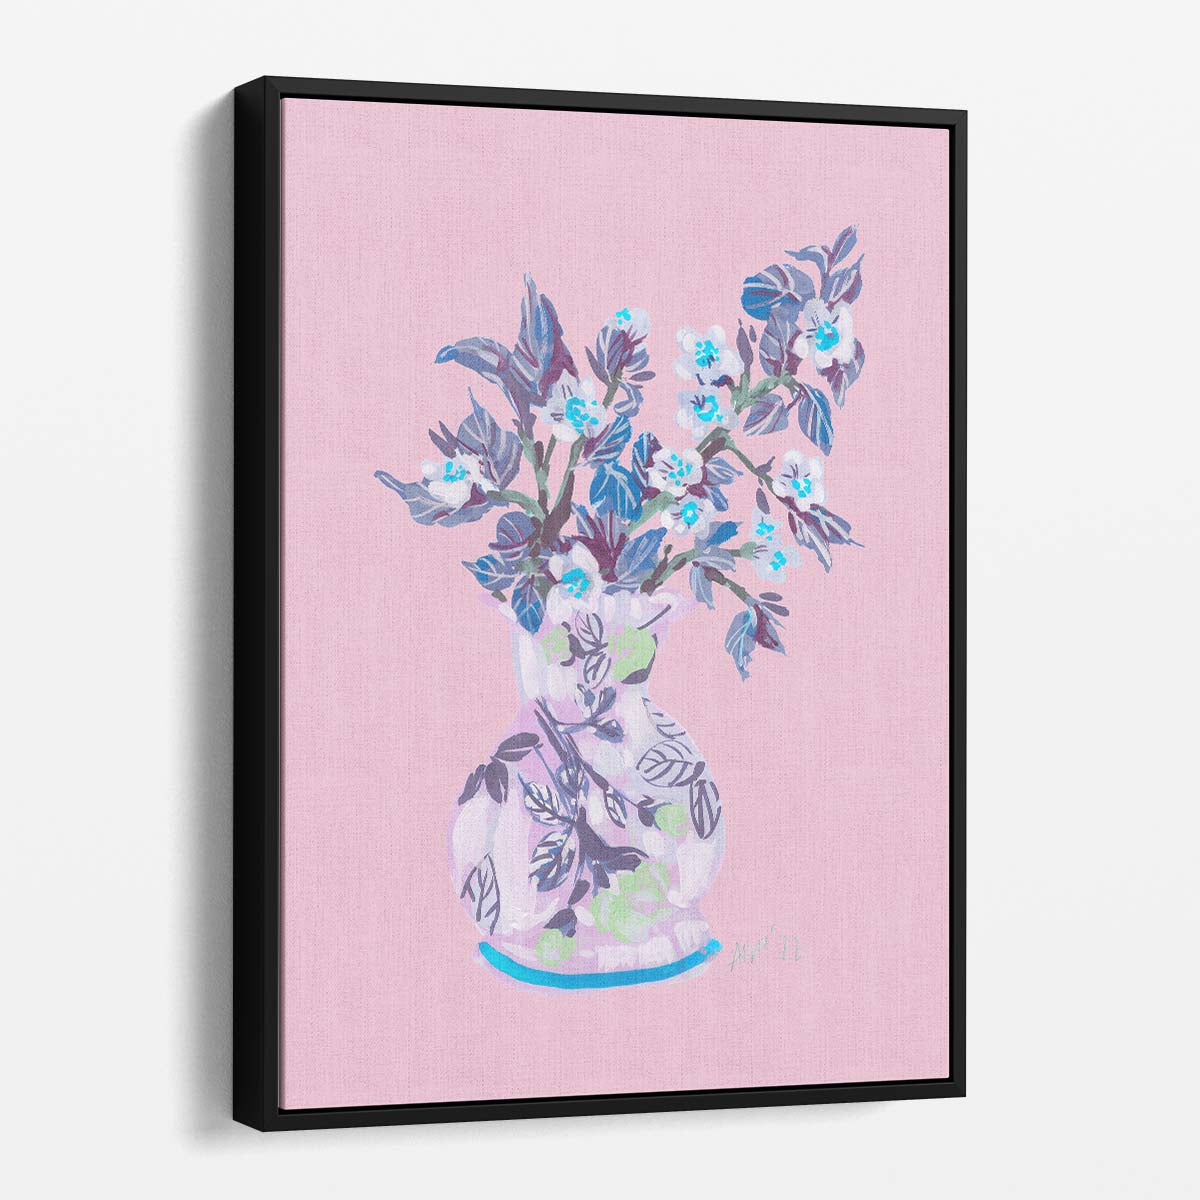 Bright Pink Apple Blossom Botanical Illustration in Neon Blue Vase by Luxuriance Designs, made in USA